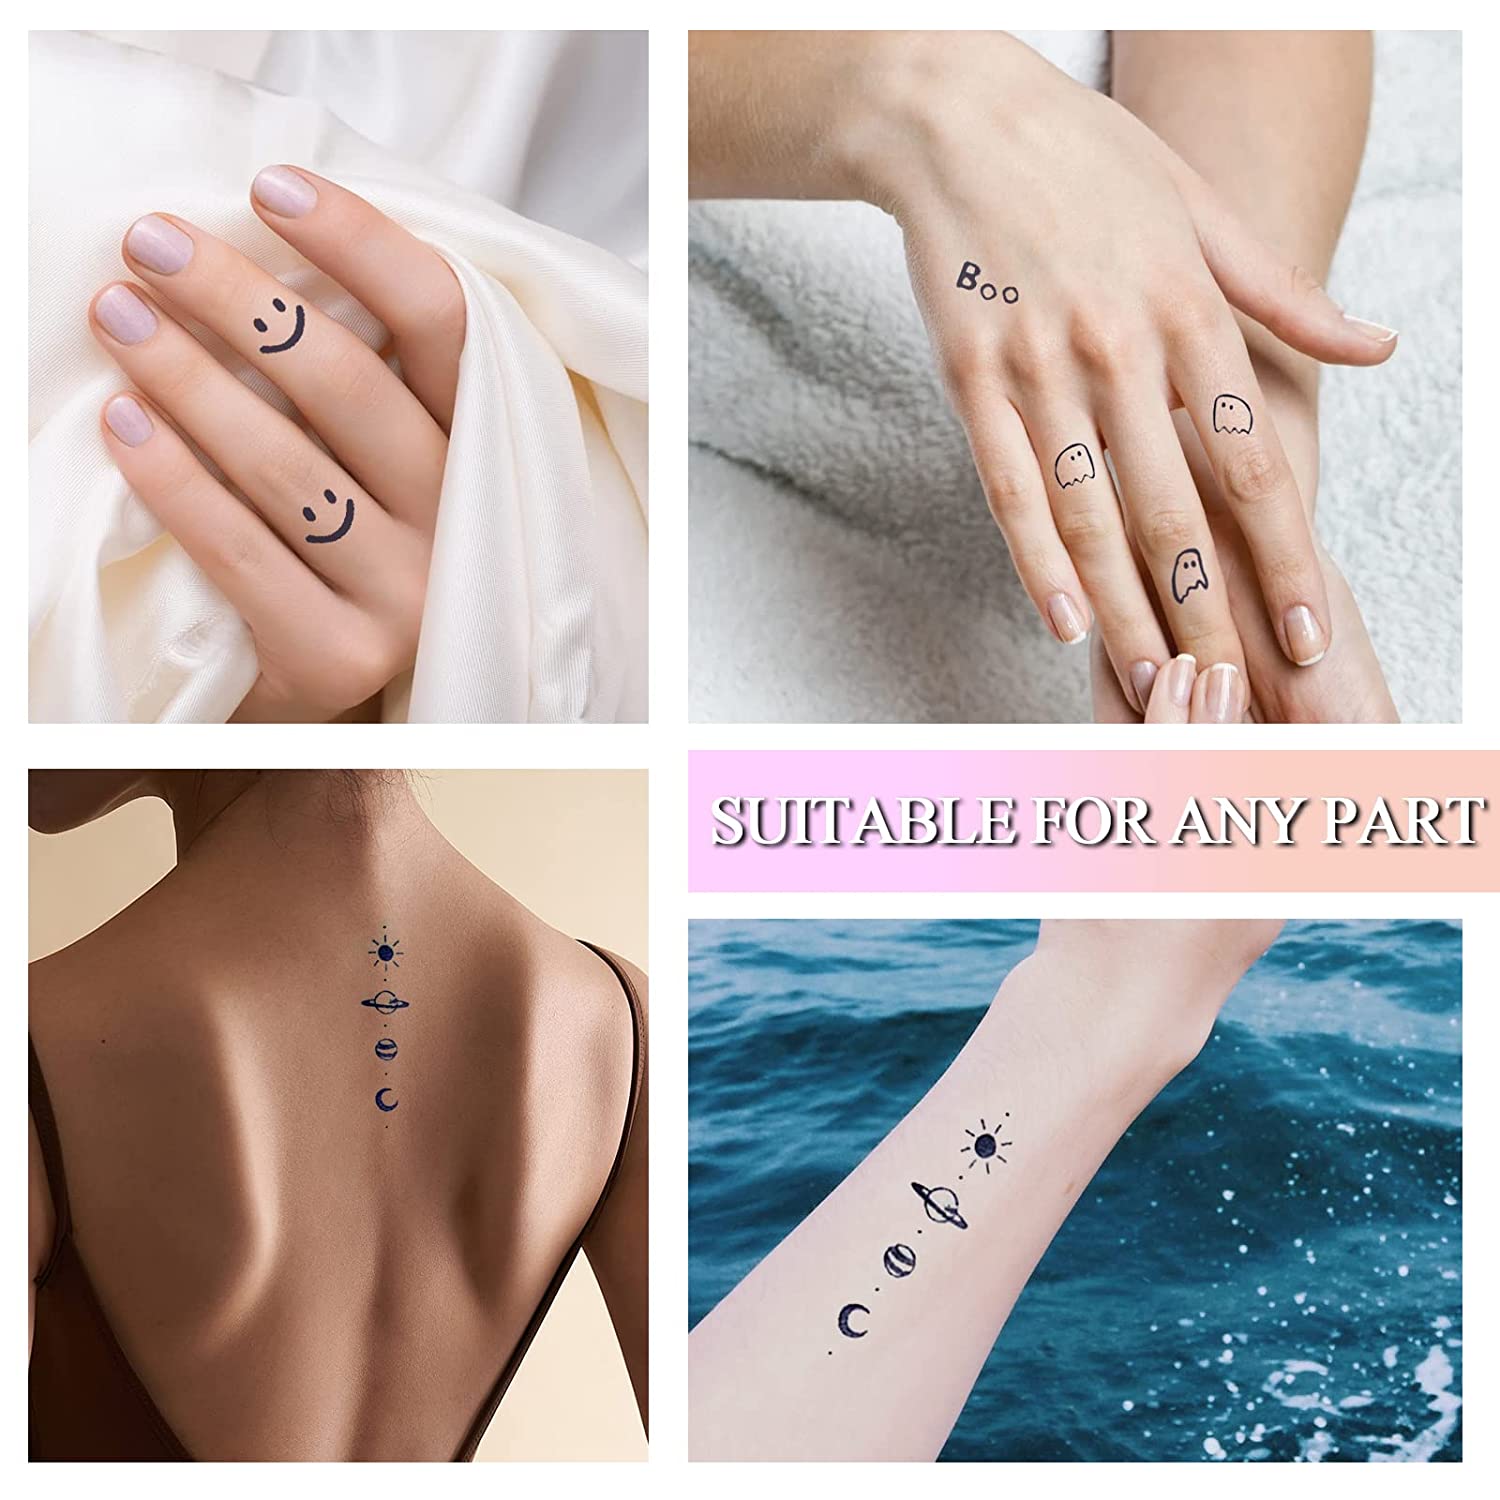 Discover 92+ about minimal meaningful tattoo latest .vn